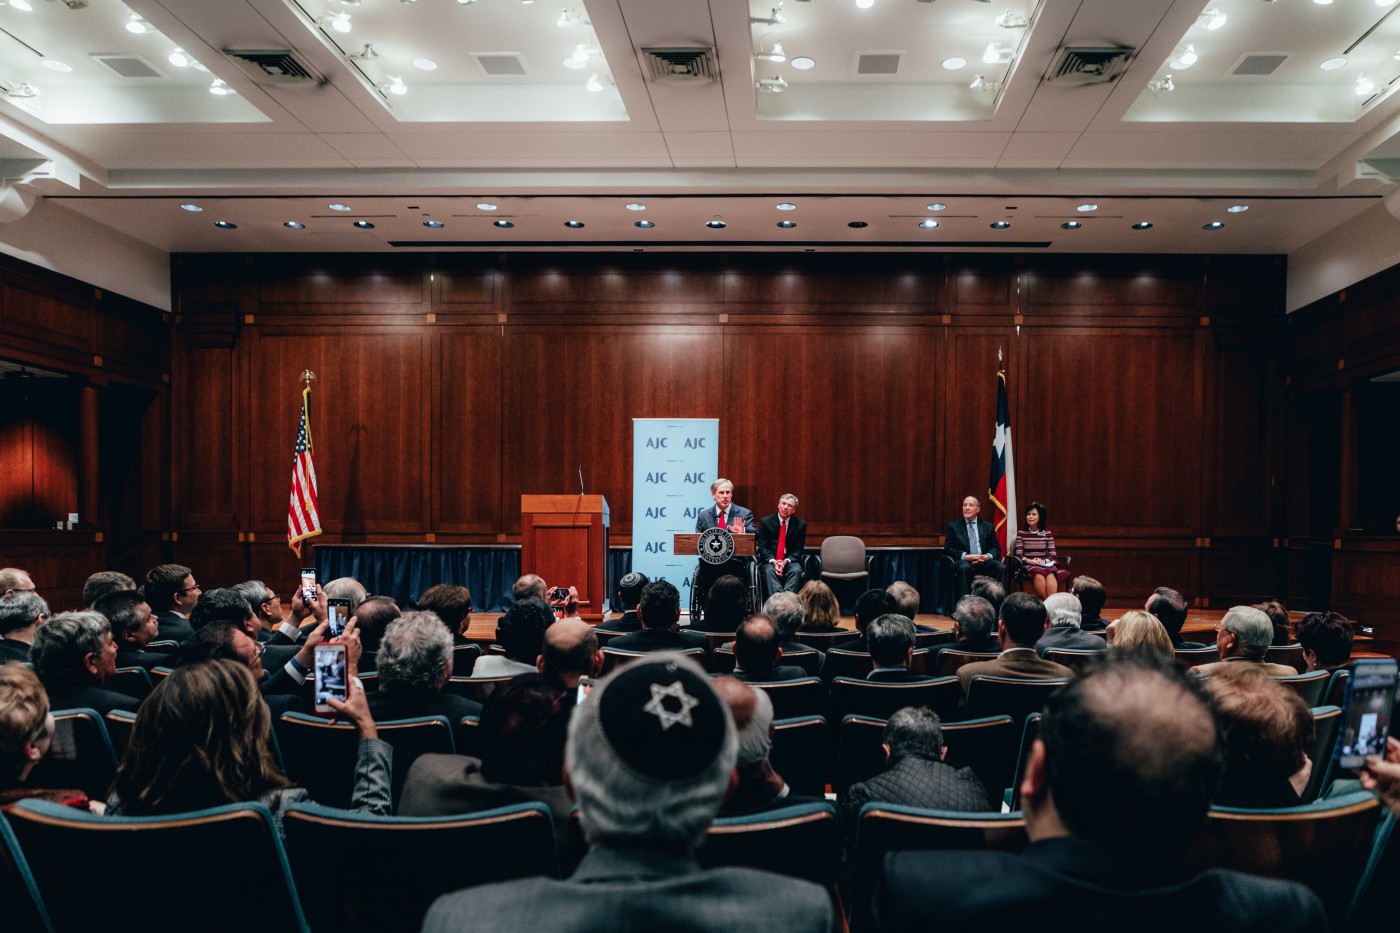 Statewide News: Governor Abbott Delivers Remarks On International Holocaust Remembrance Day In Austin